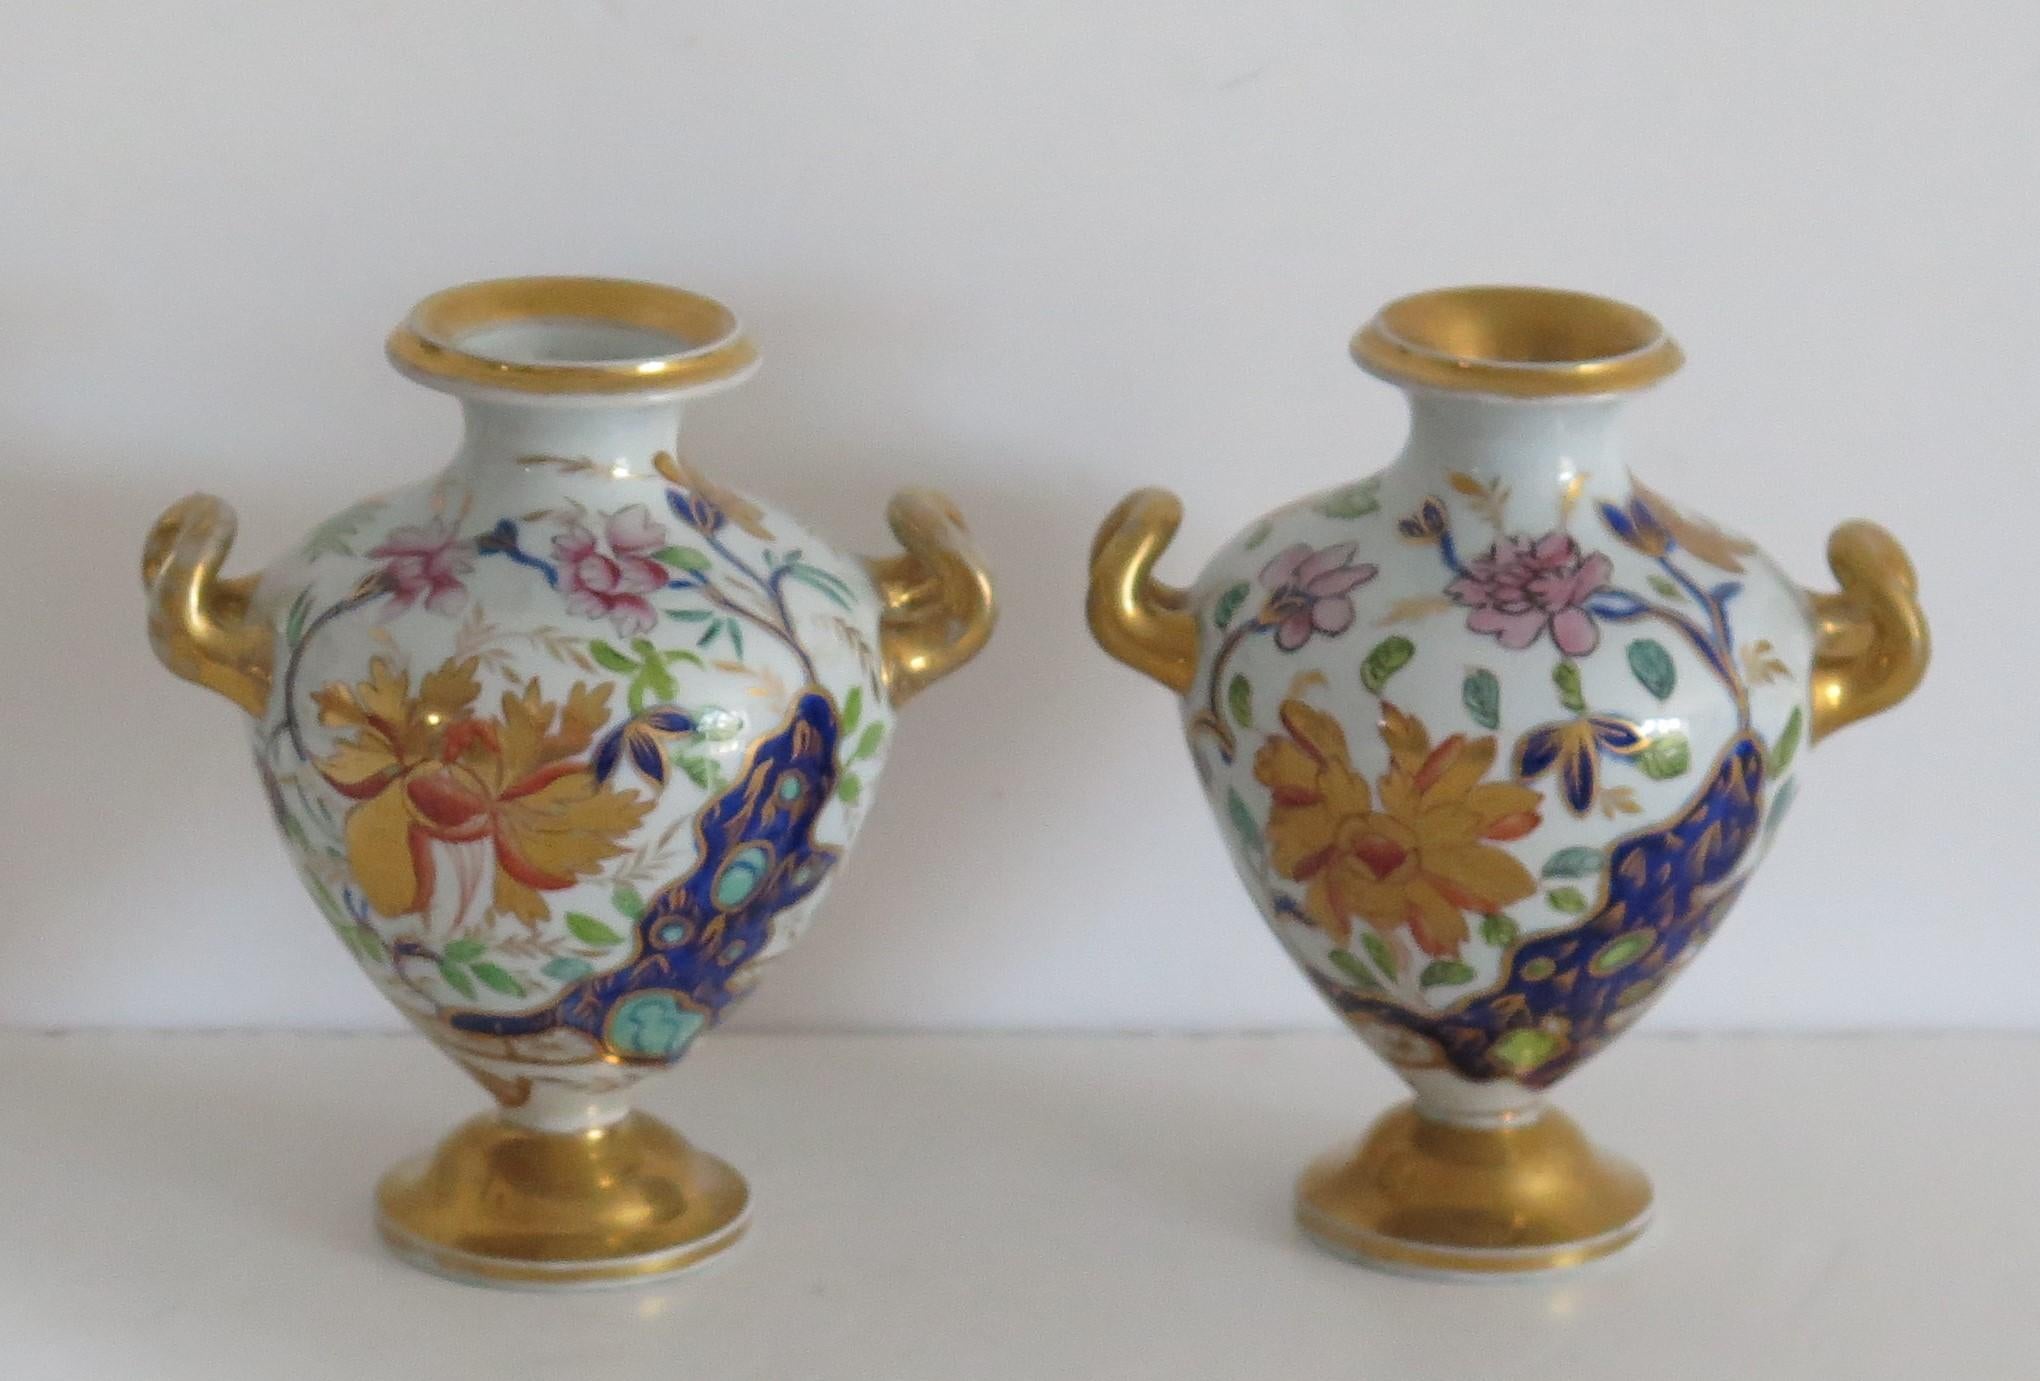 This is a fine and rare pair of miniature Mason's ironstone Vases or Urns, hand painted in in the beautiful 